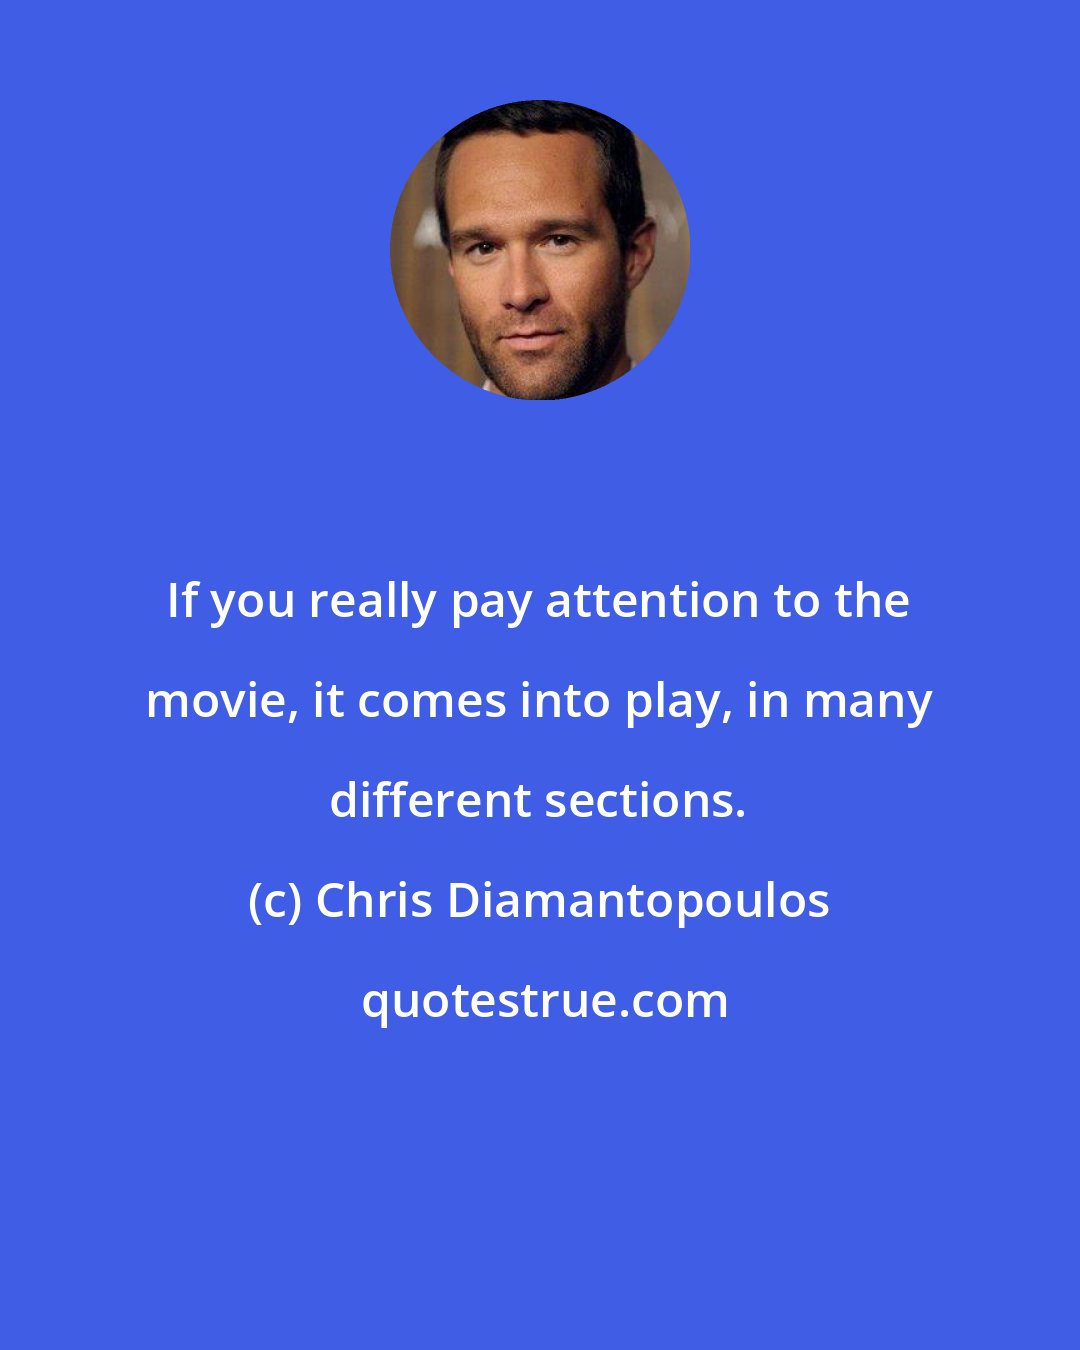 Chris Diamantopoulos: If you really pay attention to the movie, it comes into play, in many different sections.